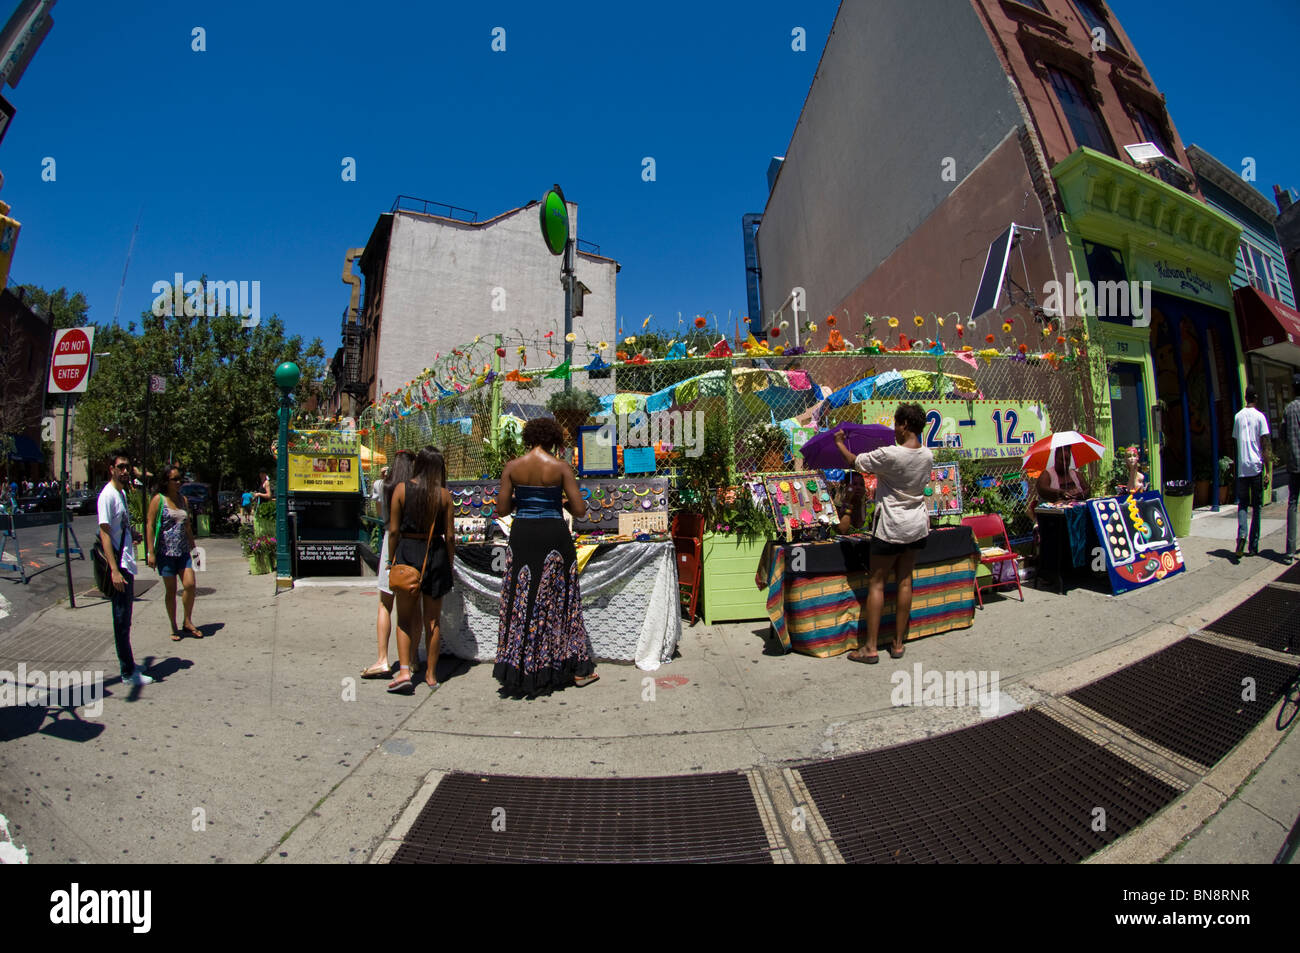 People shop at street vendor stalls in the neighborhood of Fort Greene in Brooklyn in New York Stock Photo